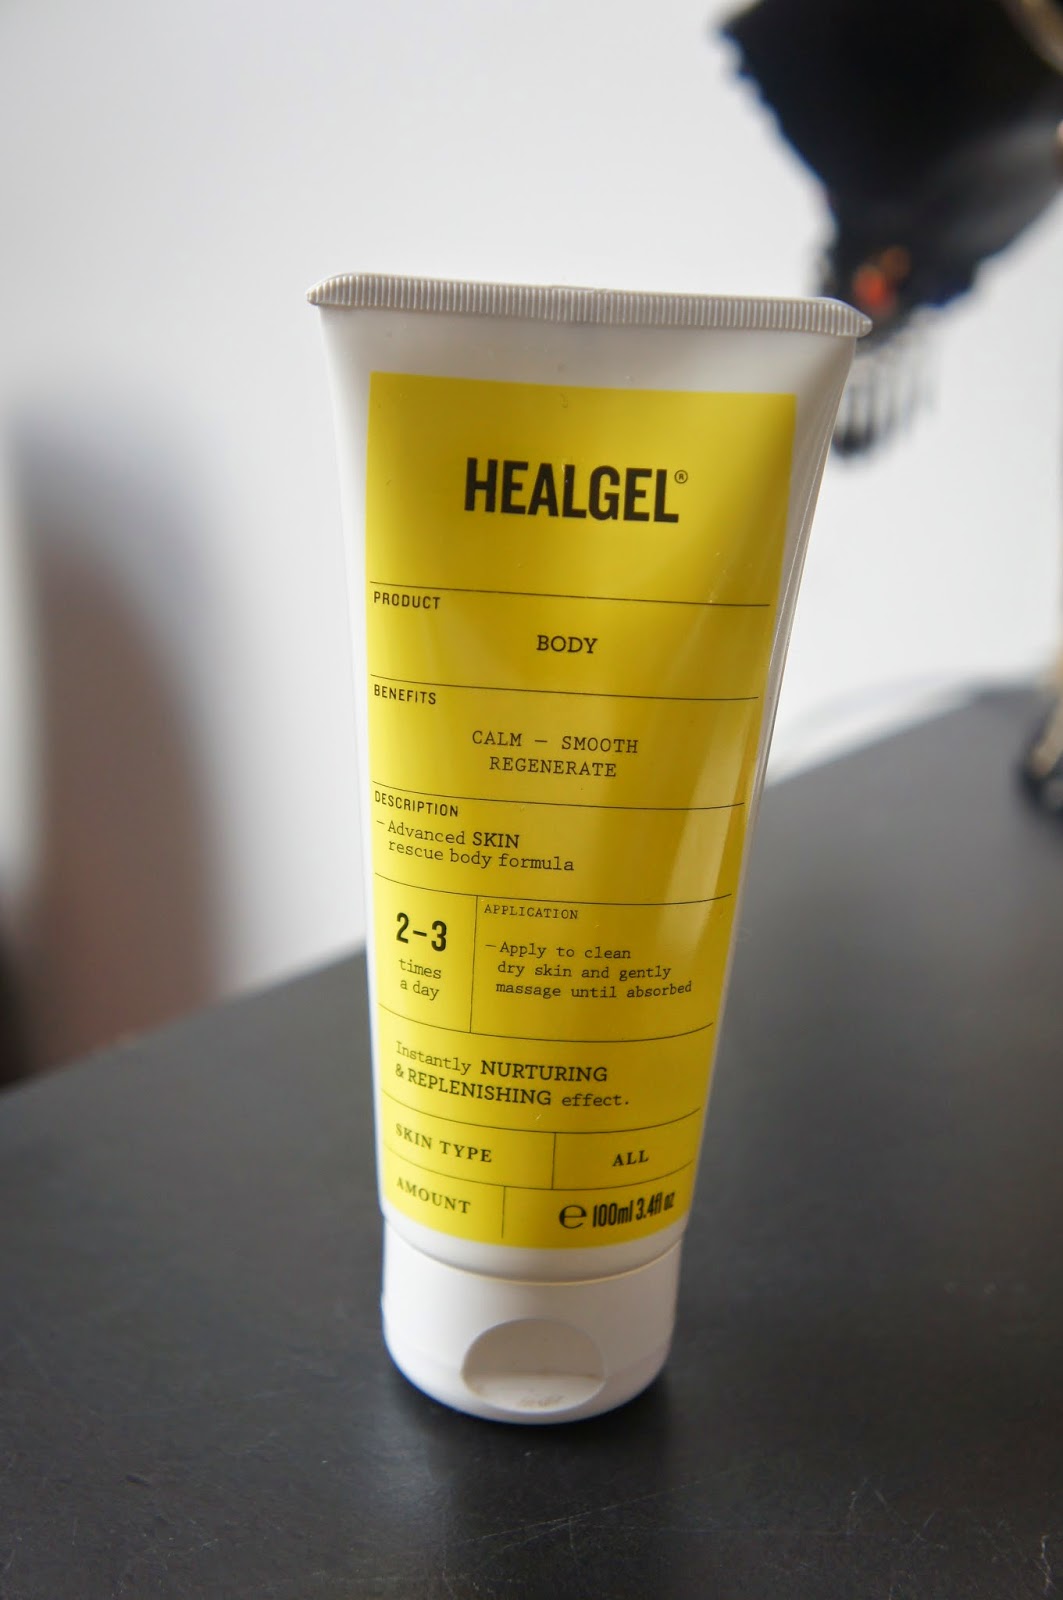 Healgel Body Review~ Calming, Smoothing And Regenerating